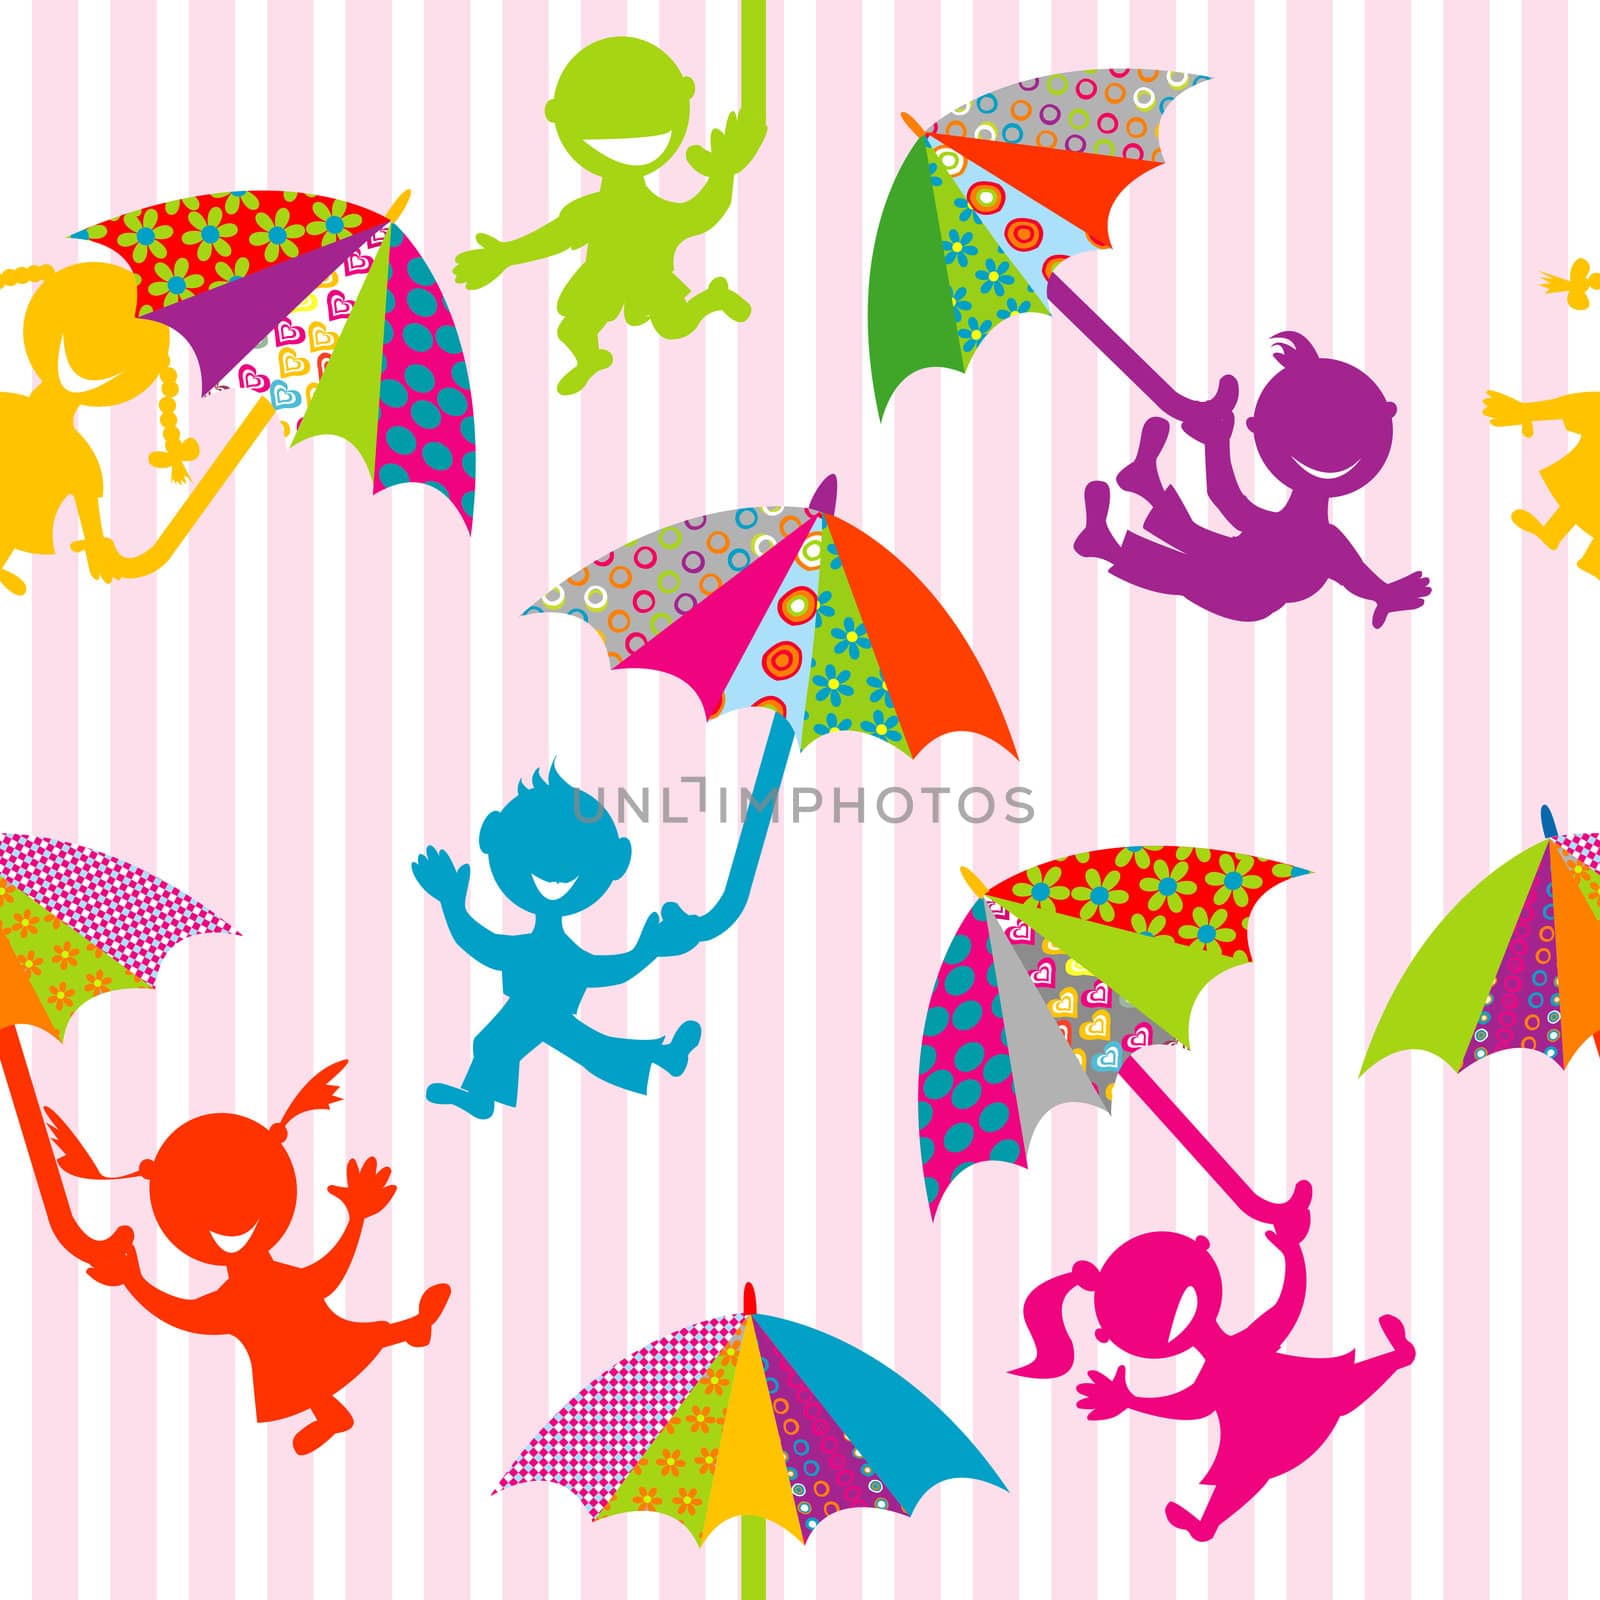 Children silhouettes with doodle umbrellas by hibrida13